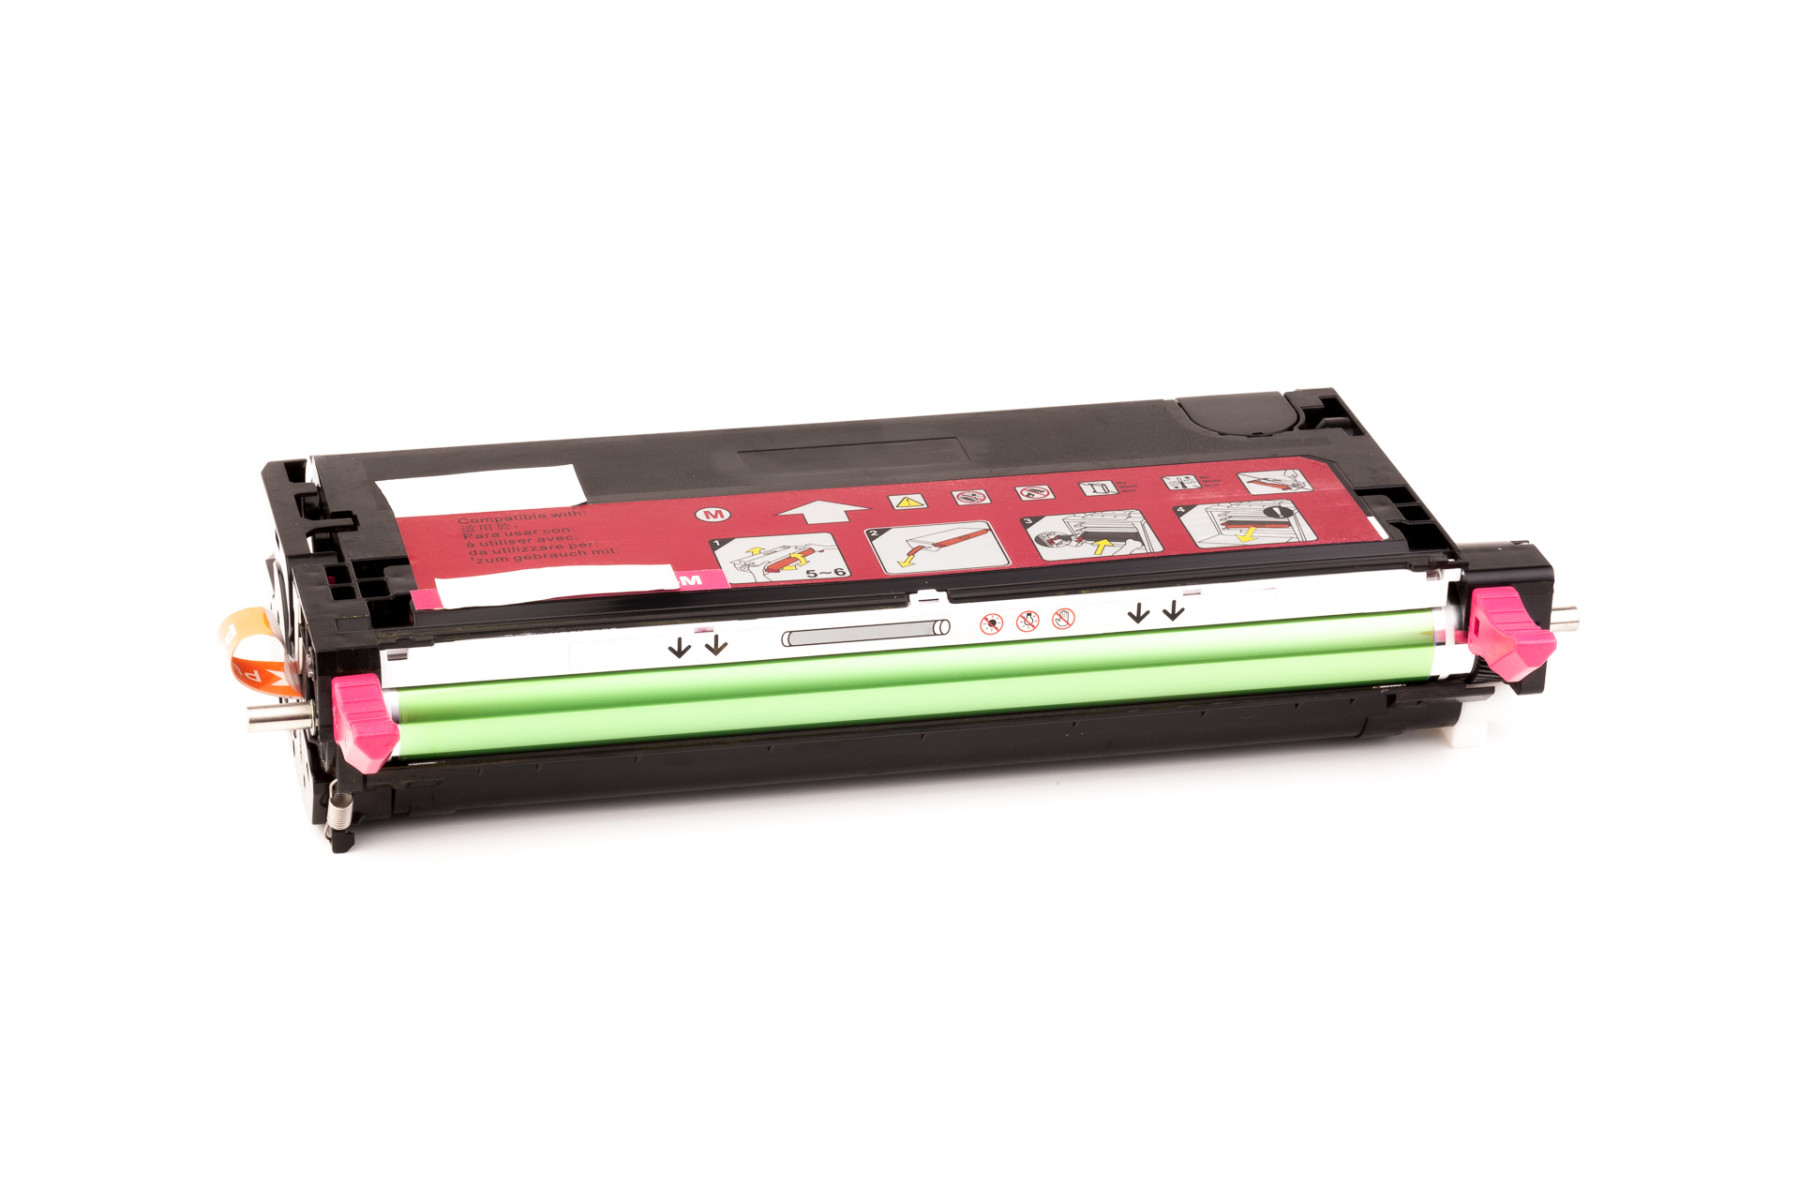 Set consisting of Toner cartridge (alternative) compatible with Xerox Phaser 6180 / DN / MFP / N black, cyan, magenta, yellow - Save 6%